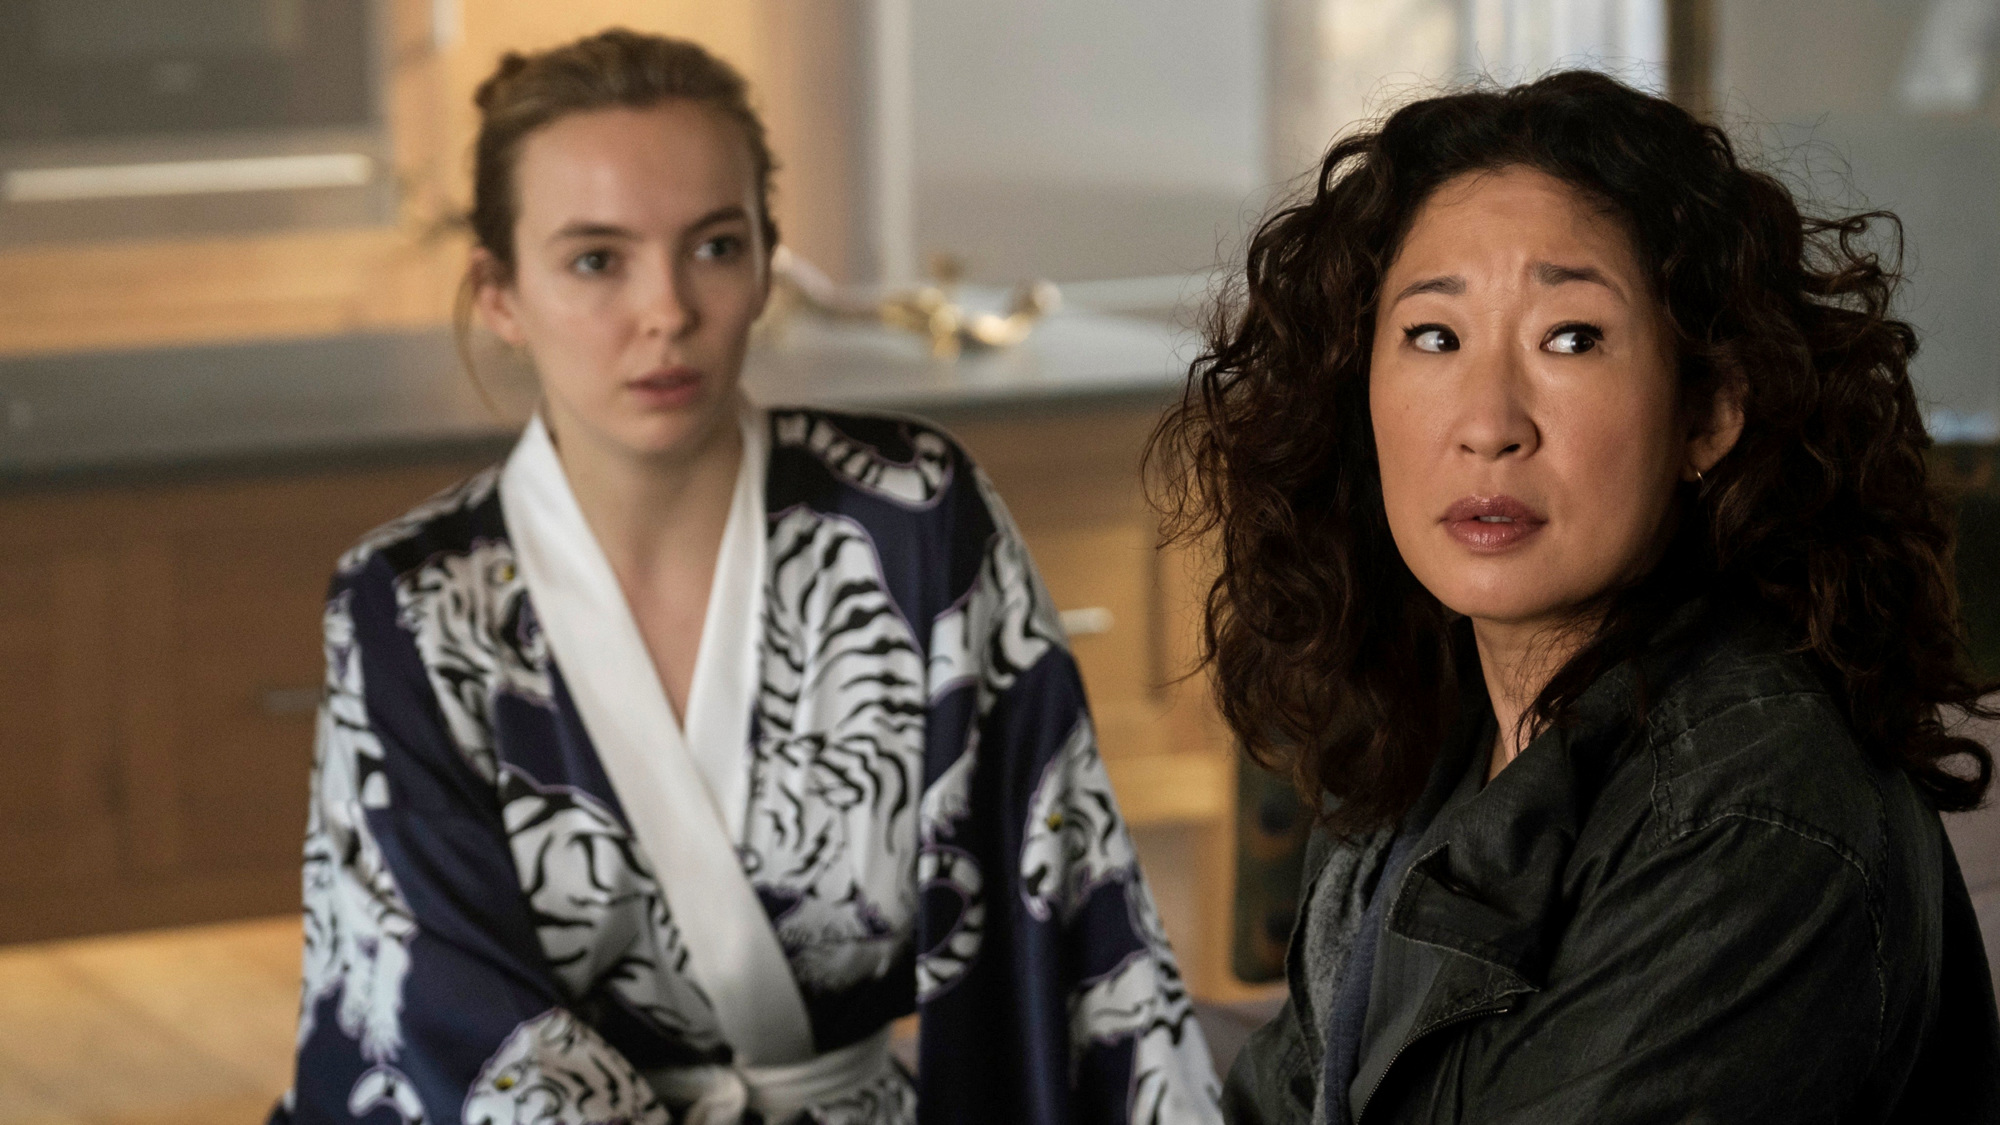 Jodie Comer as Villanelle and Sandra Oh as Eve in "Killing Eve"